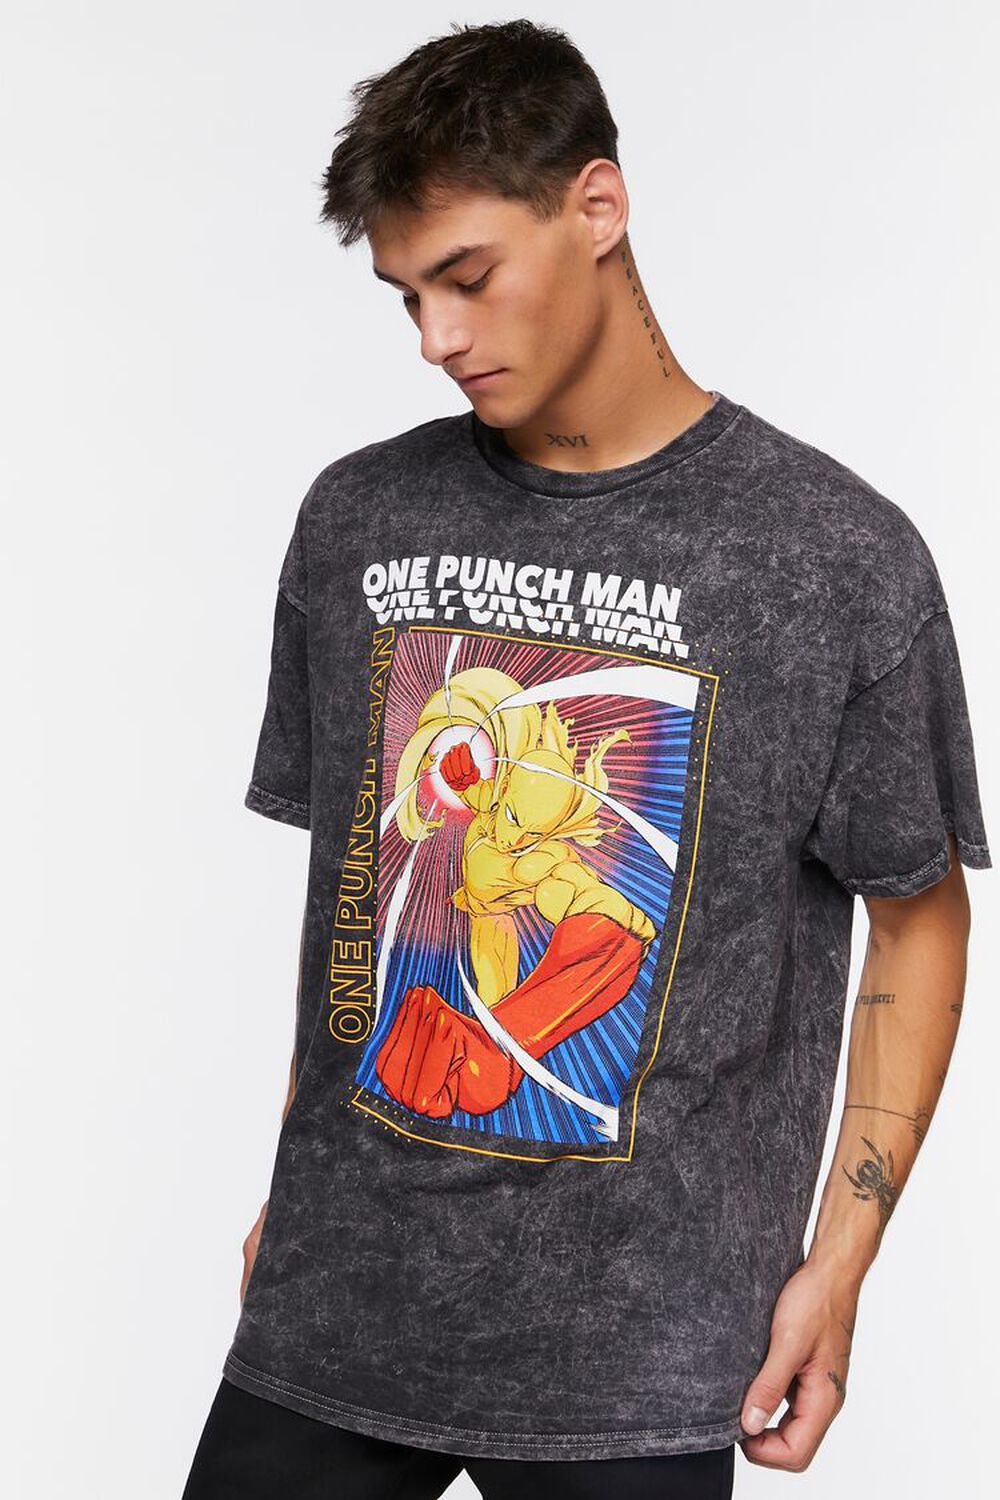 BLACK/MULTI One Punch Man Graphic Tee, image 1